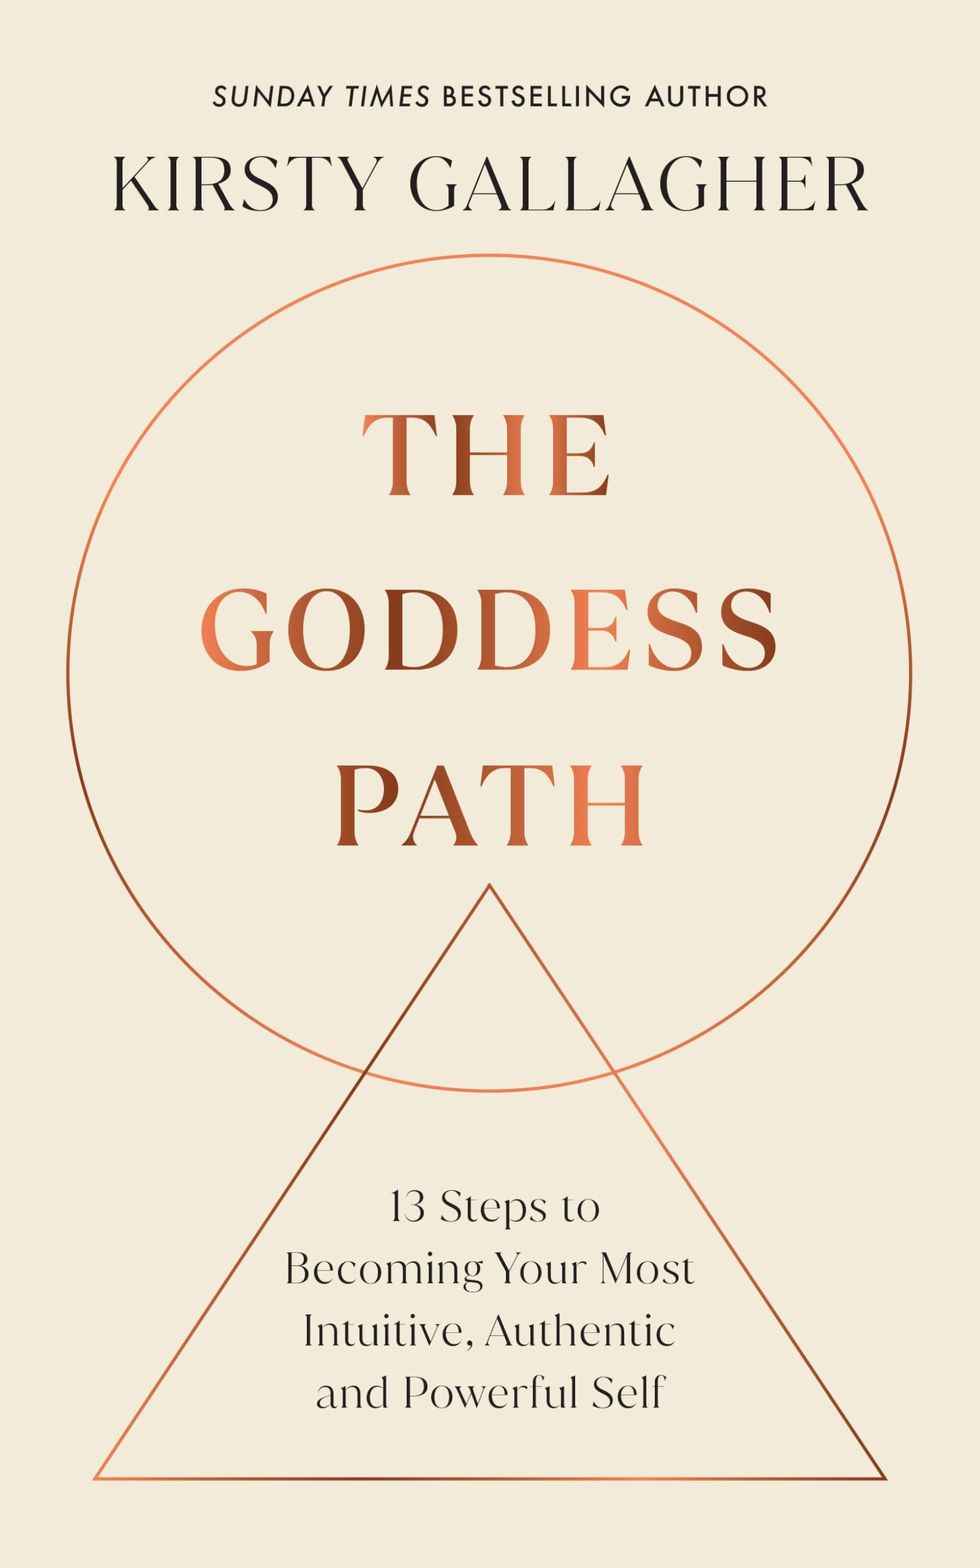 'The Goddess Path', Kirsty Gallagher